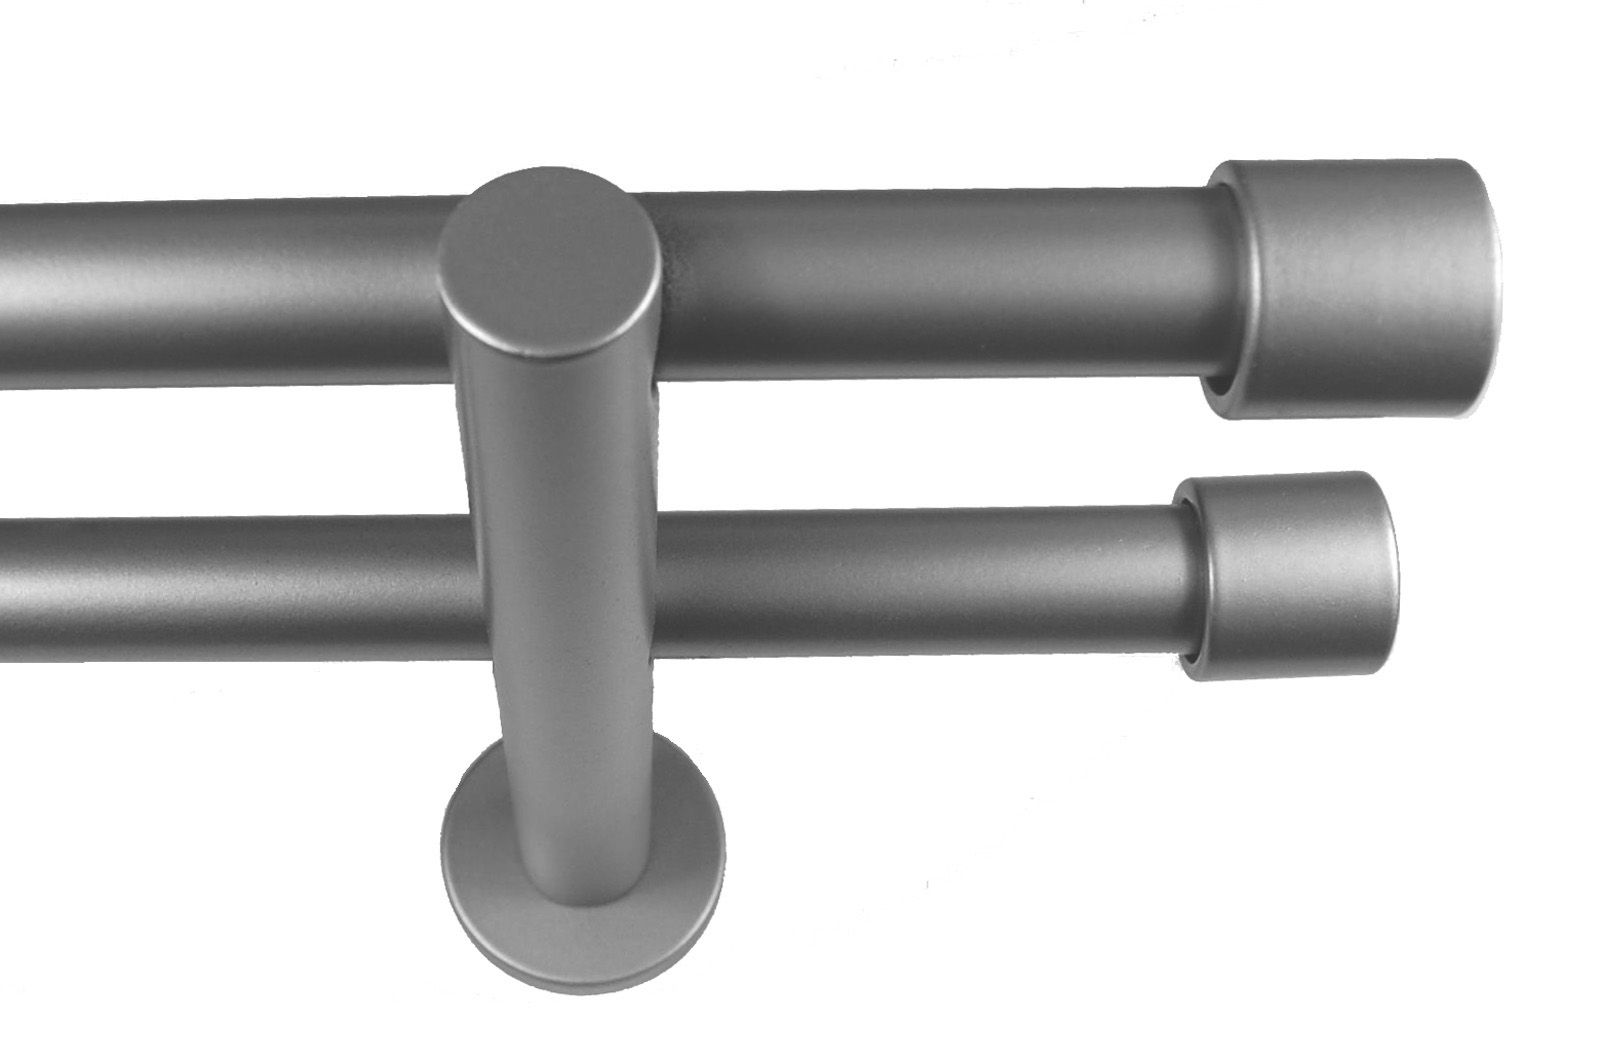 BCL Verona Double Curtain Rod, Pewter Finish, 48-inch to 86-inch, 5/8" Diameter Pole